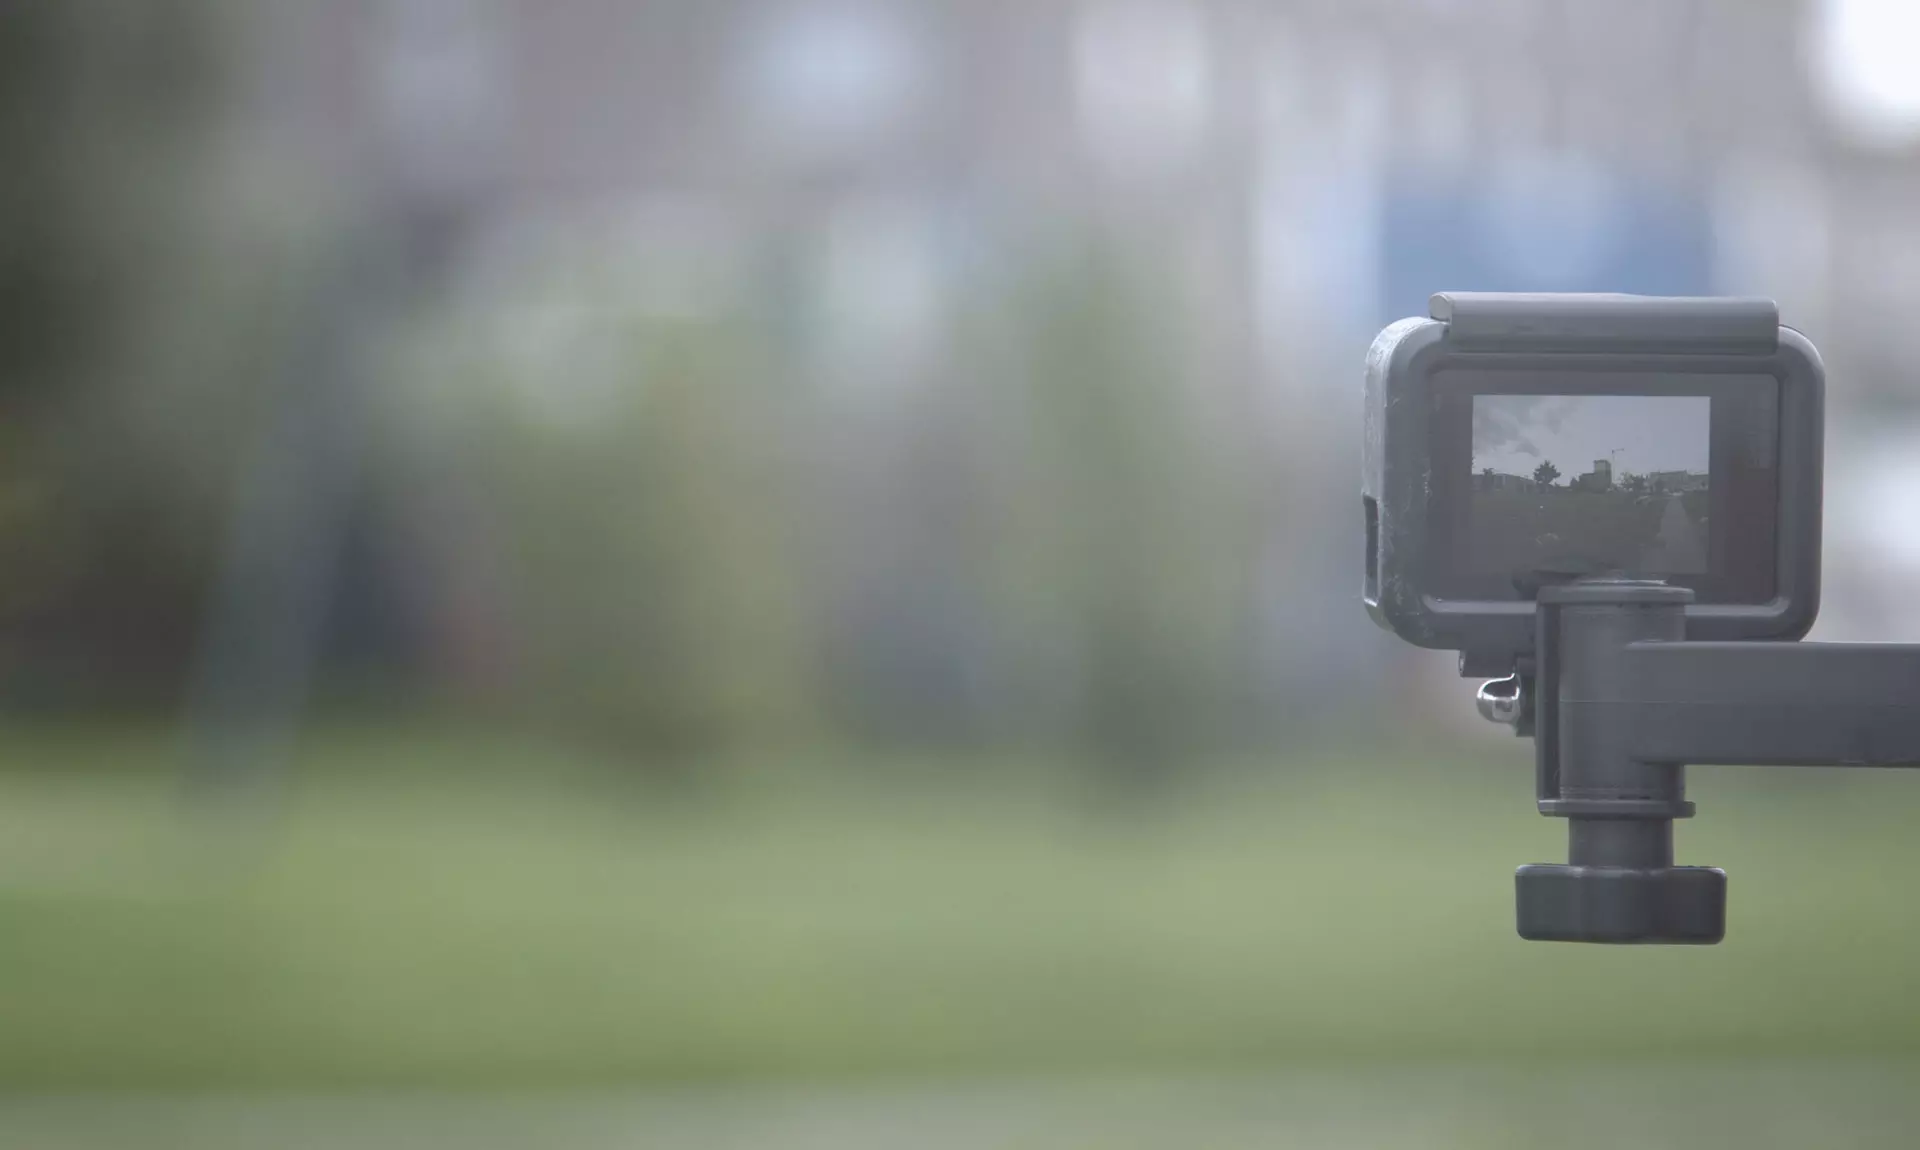 We shoot videos to introduce your project in just 60 seconds